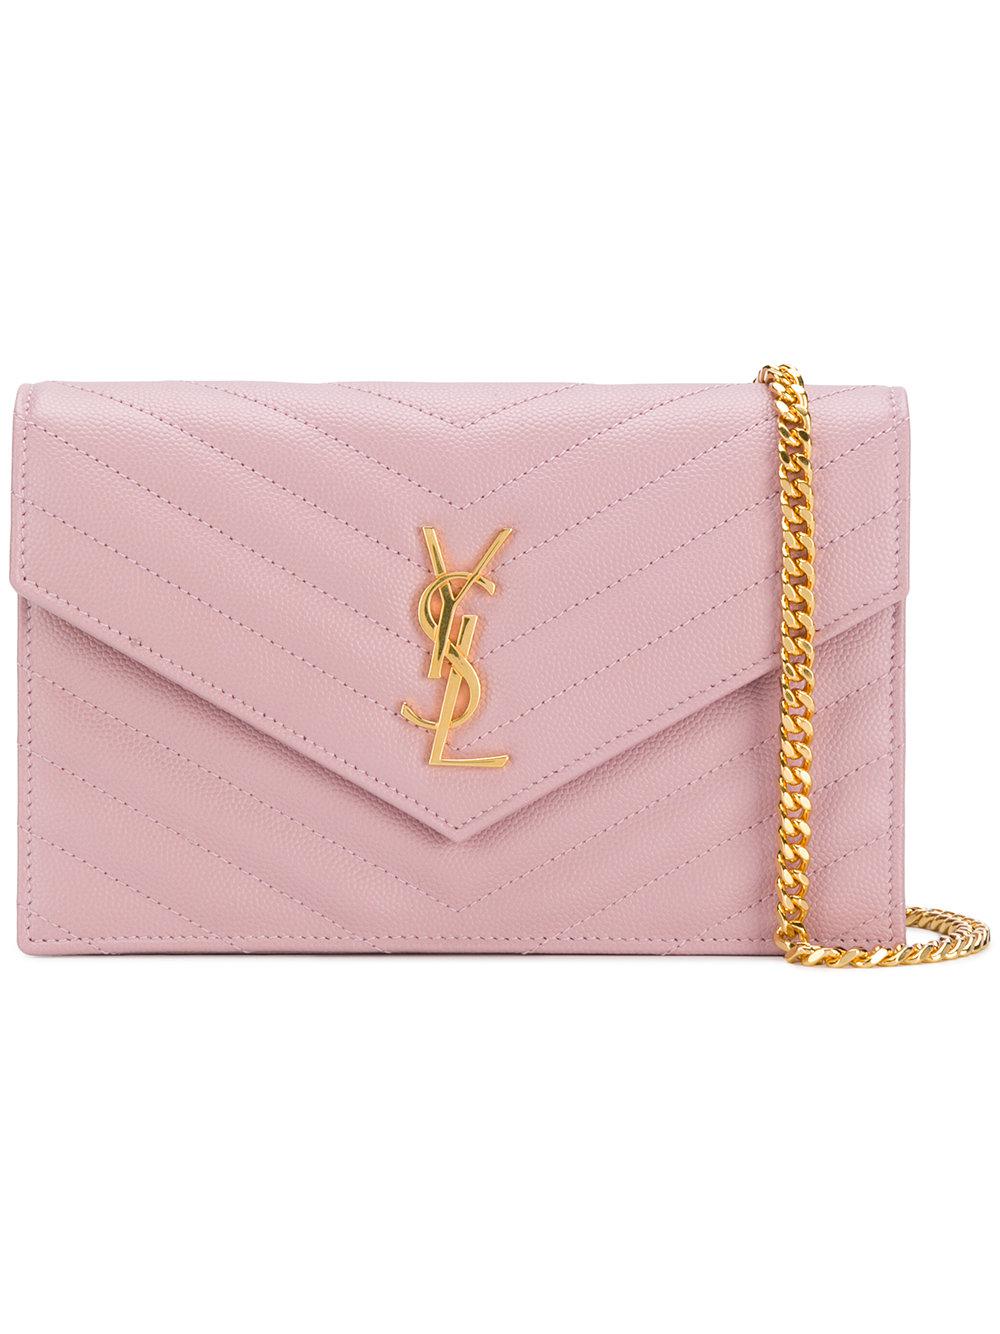 Saint Laurent Small Monogram Quilted Leather Envelope Wallet on a Chain